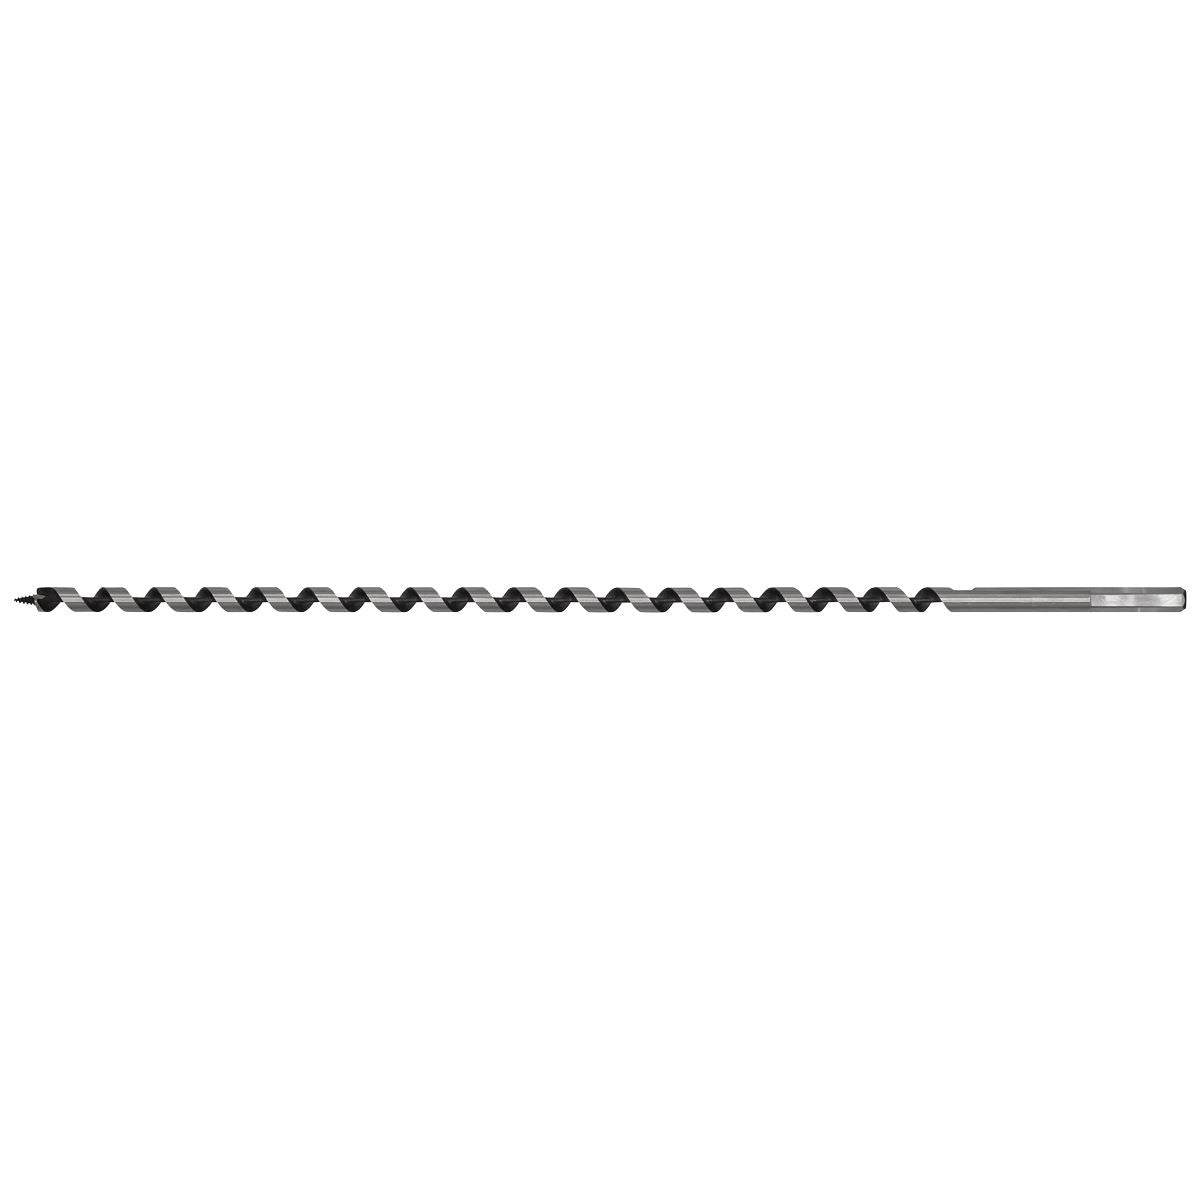 Worksafe by Sealey Auger Wood Drill Bit 8mm x 460mm